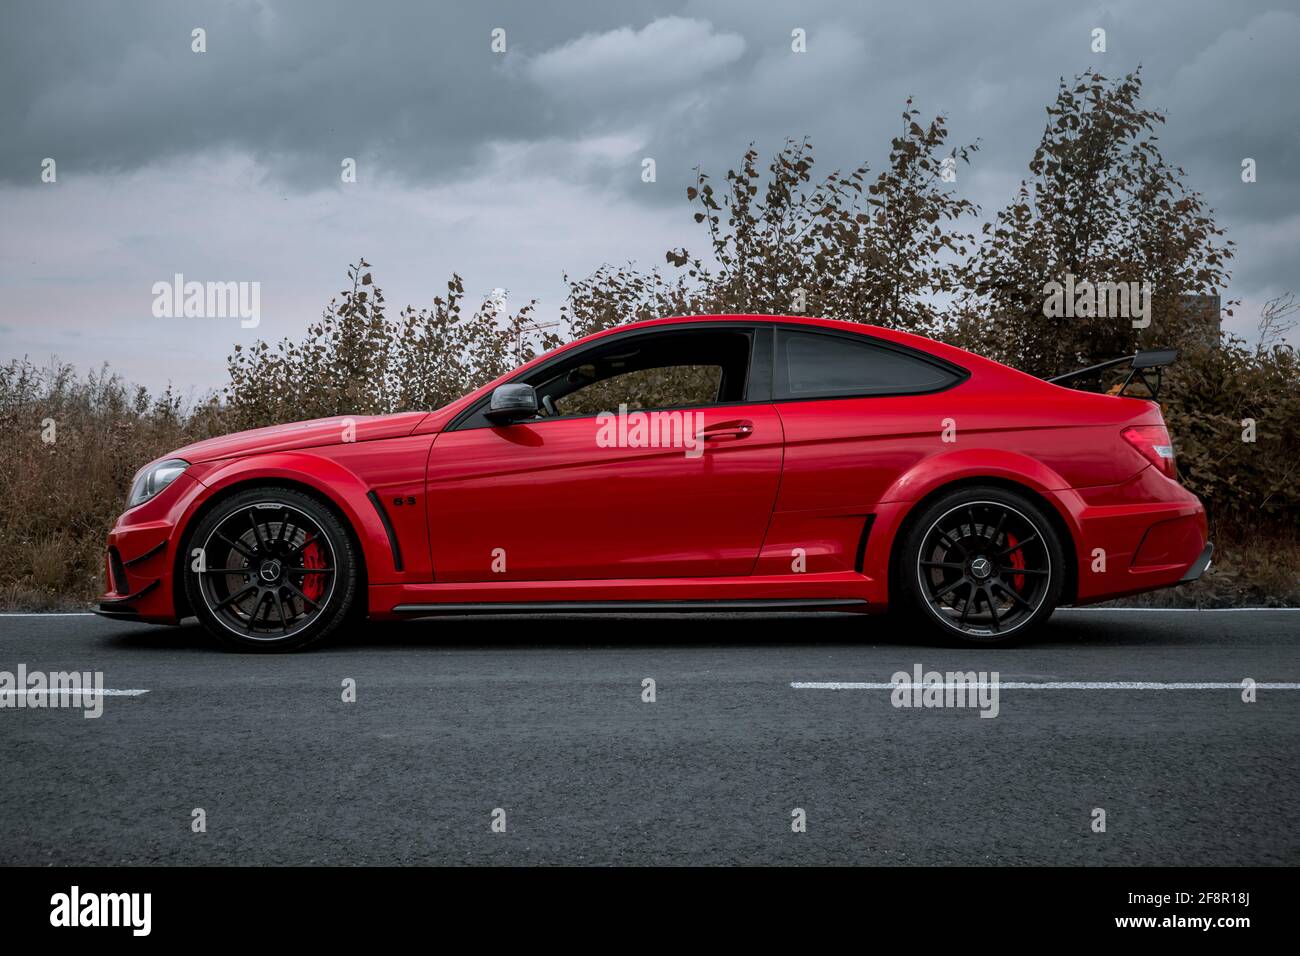 Mercedes Benz C63 Amg High Resolution Stock Photography And Images Alamy